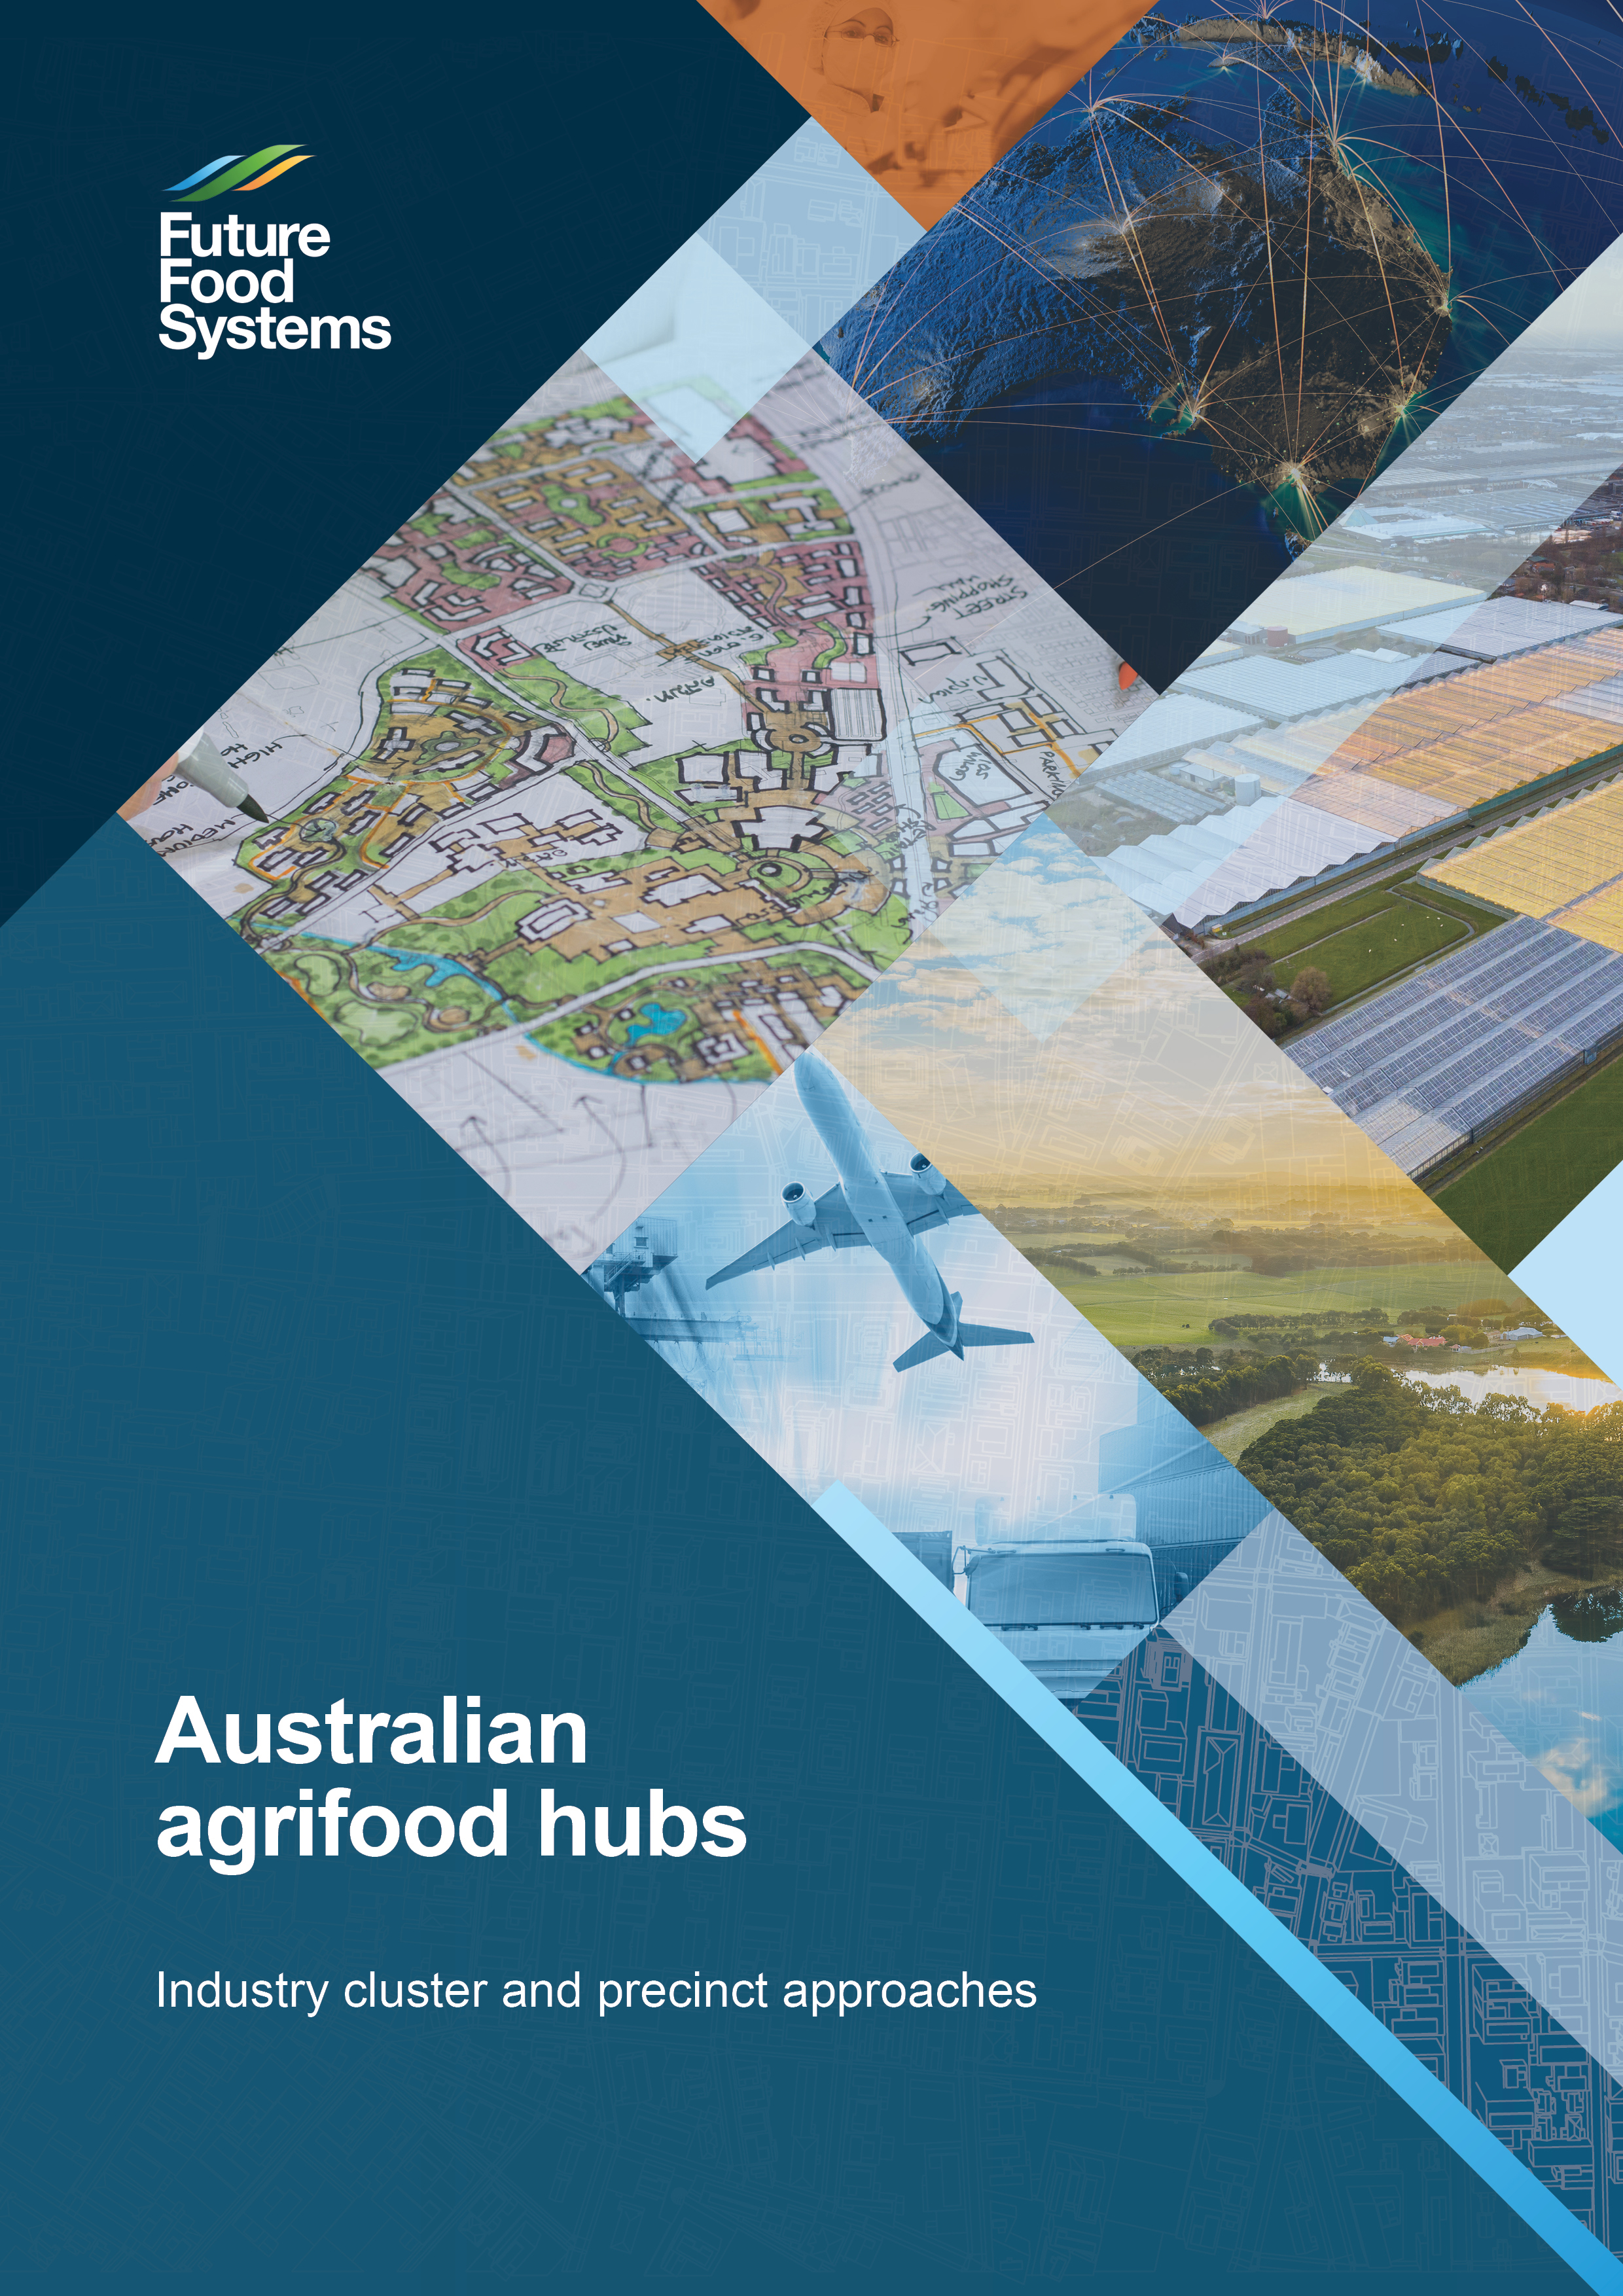 In this useful report, QUT's Randall McHugh explores the pros and cons of specialist industry clusters, and examines the potential benefits to our agrifood sector of clustering in locations well suited to agrifood operations..